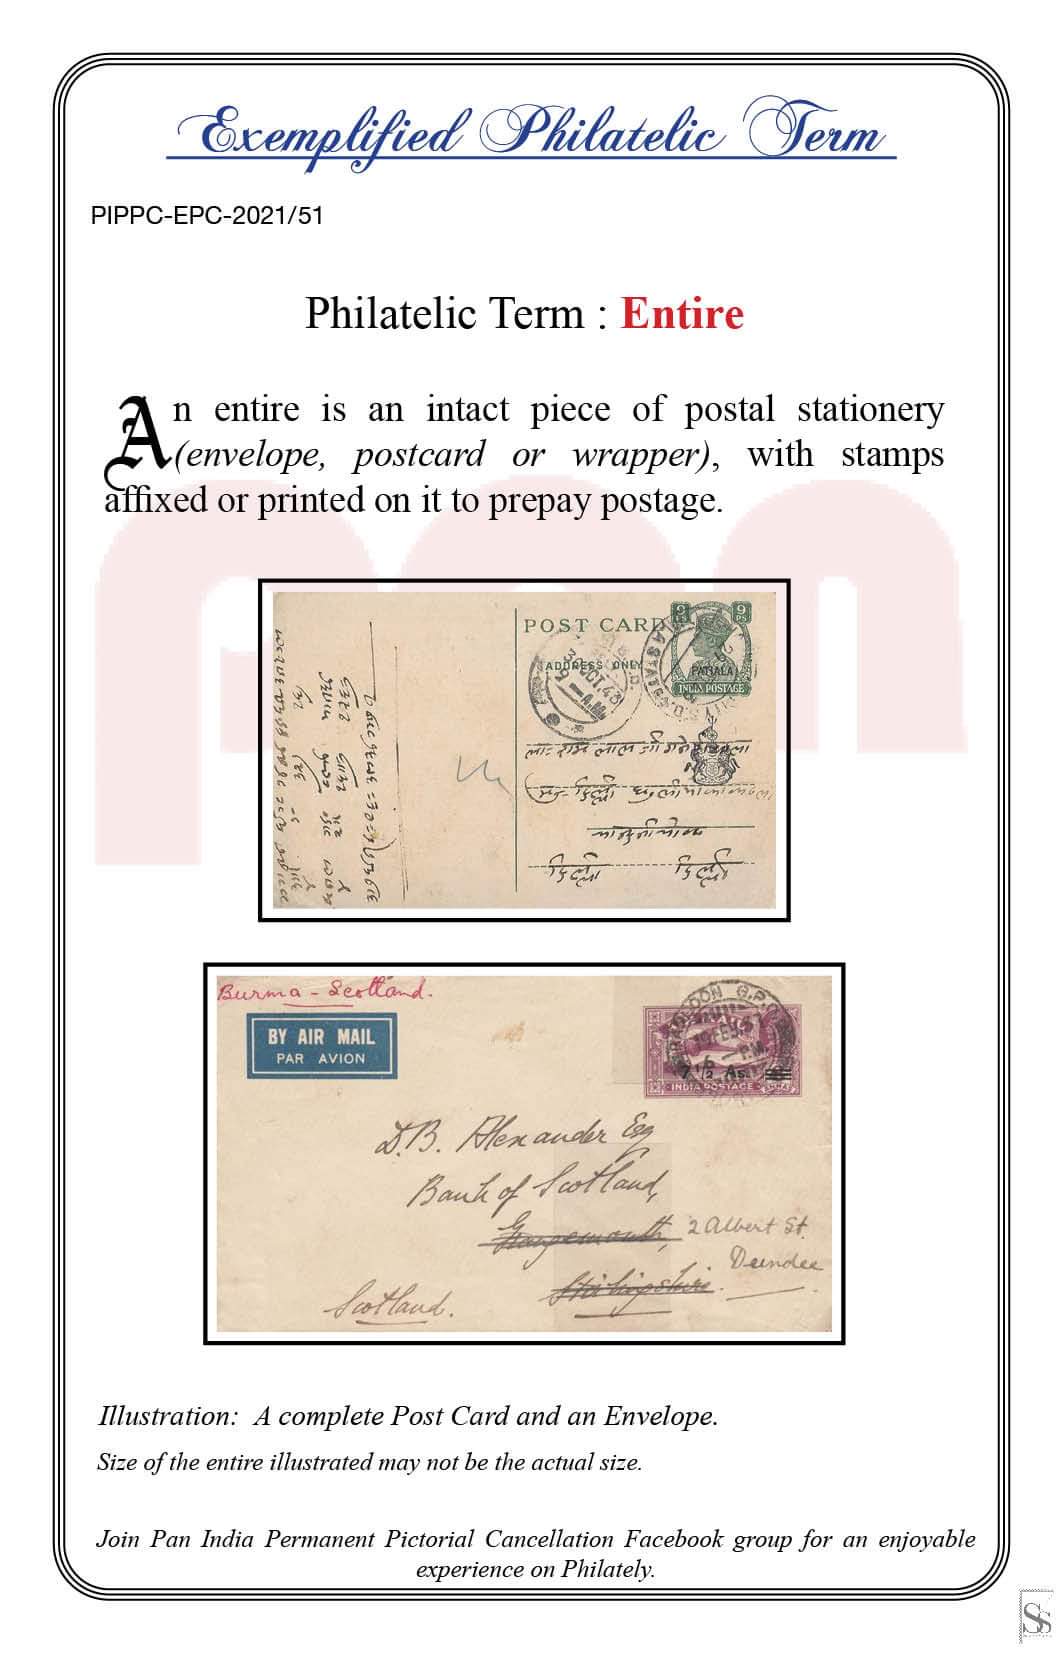 51. Today's Exemplified Philatelic term-Entire